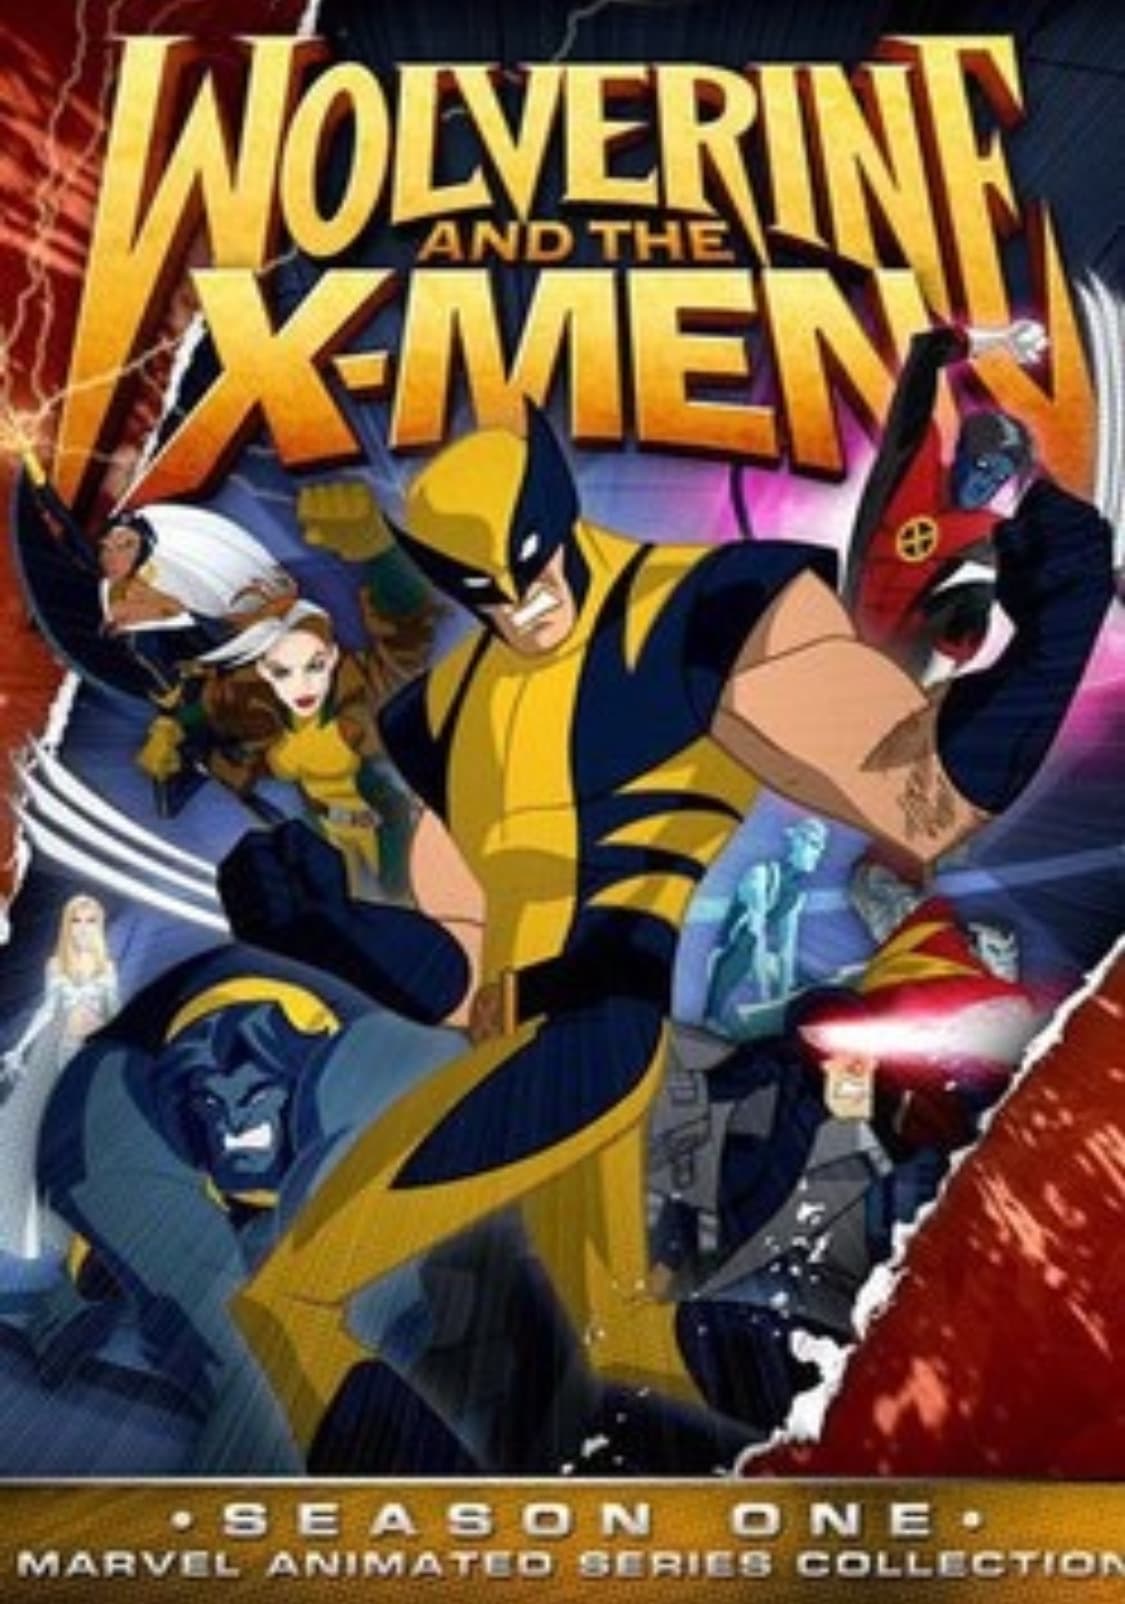 wolverine-and-the-x-men-where-to-watch-and-stream-online